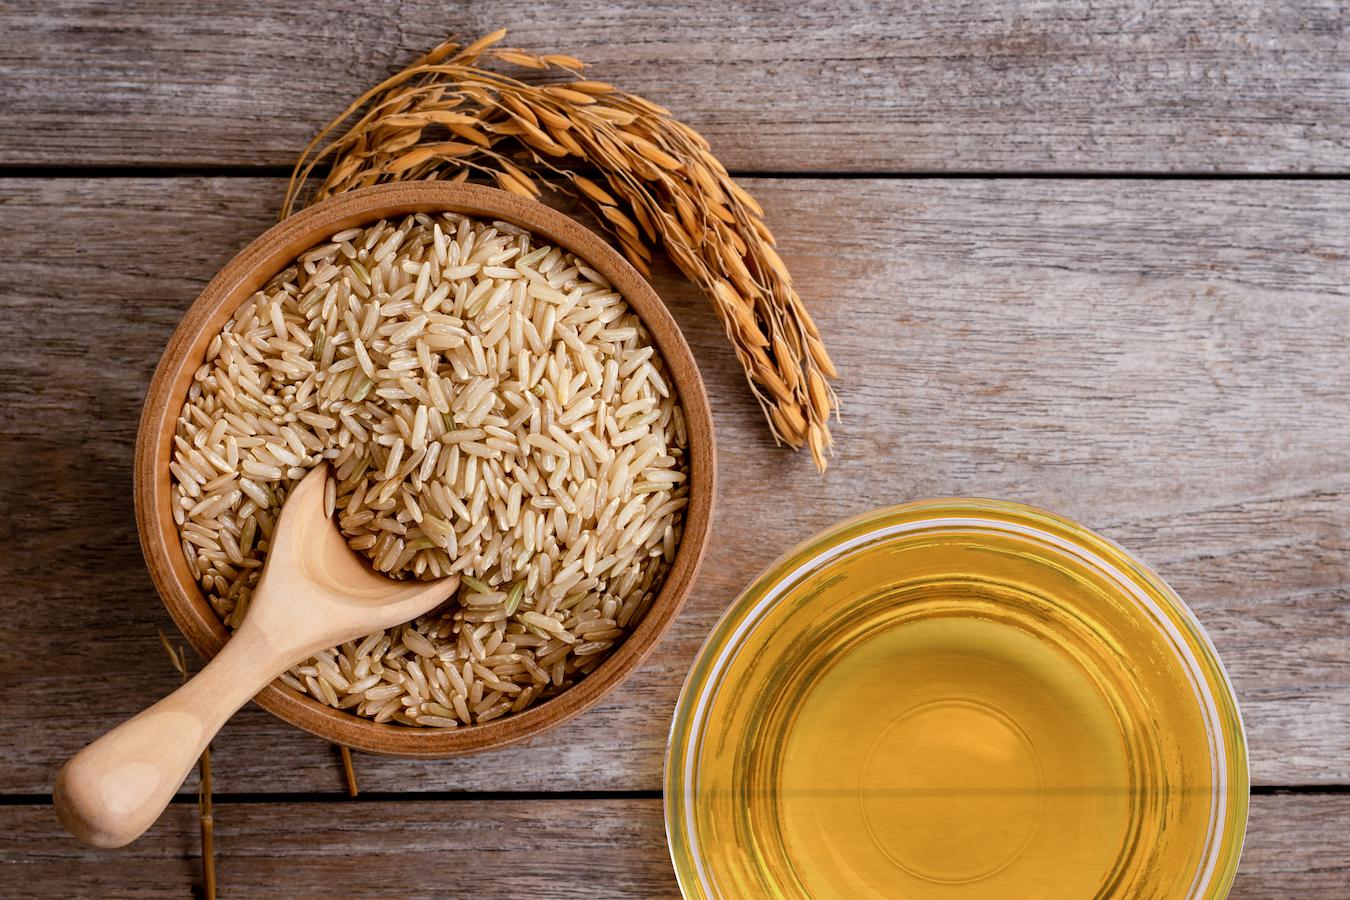 Rice Bran Oil For Skin: 4 Amazing Benefits You Should Know – JUARA